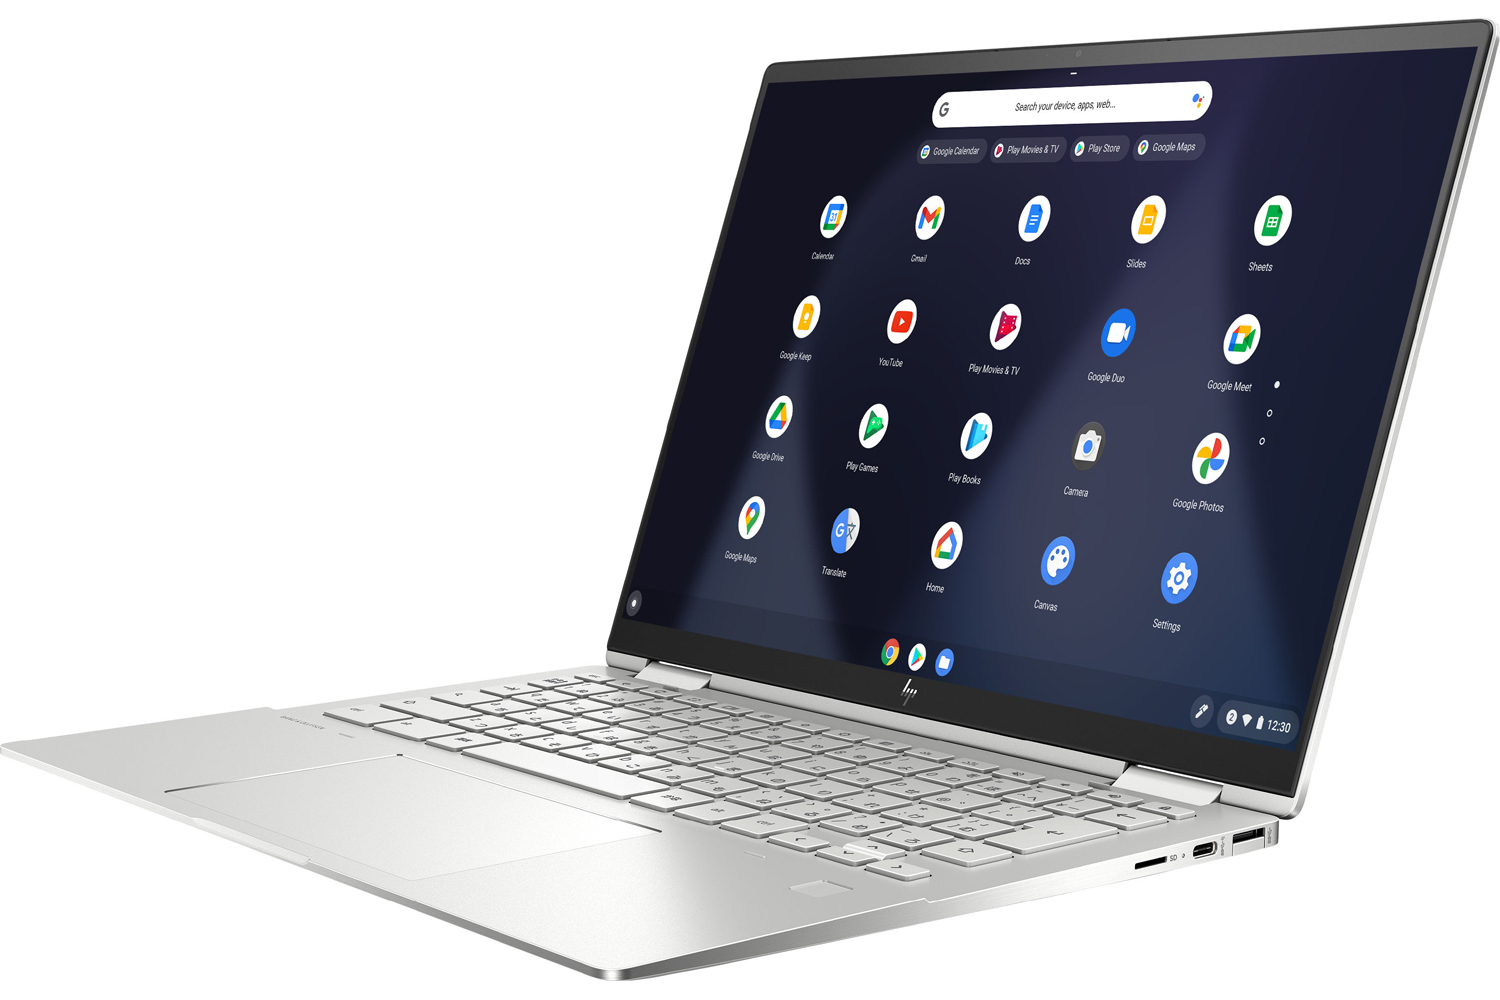 The HP Chromebook x360 13 2-in-1 in laptop mode.